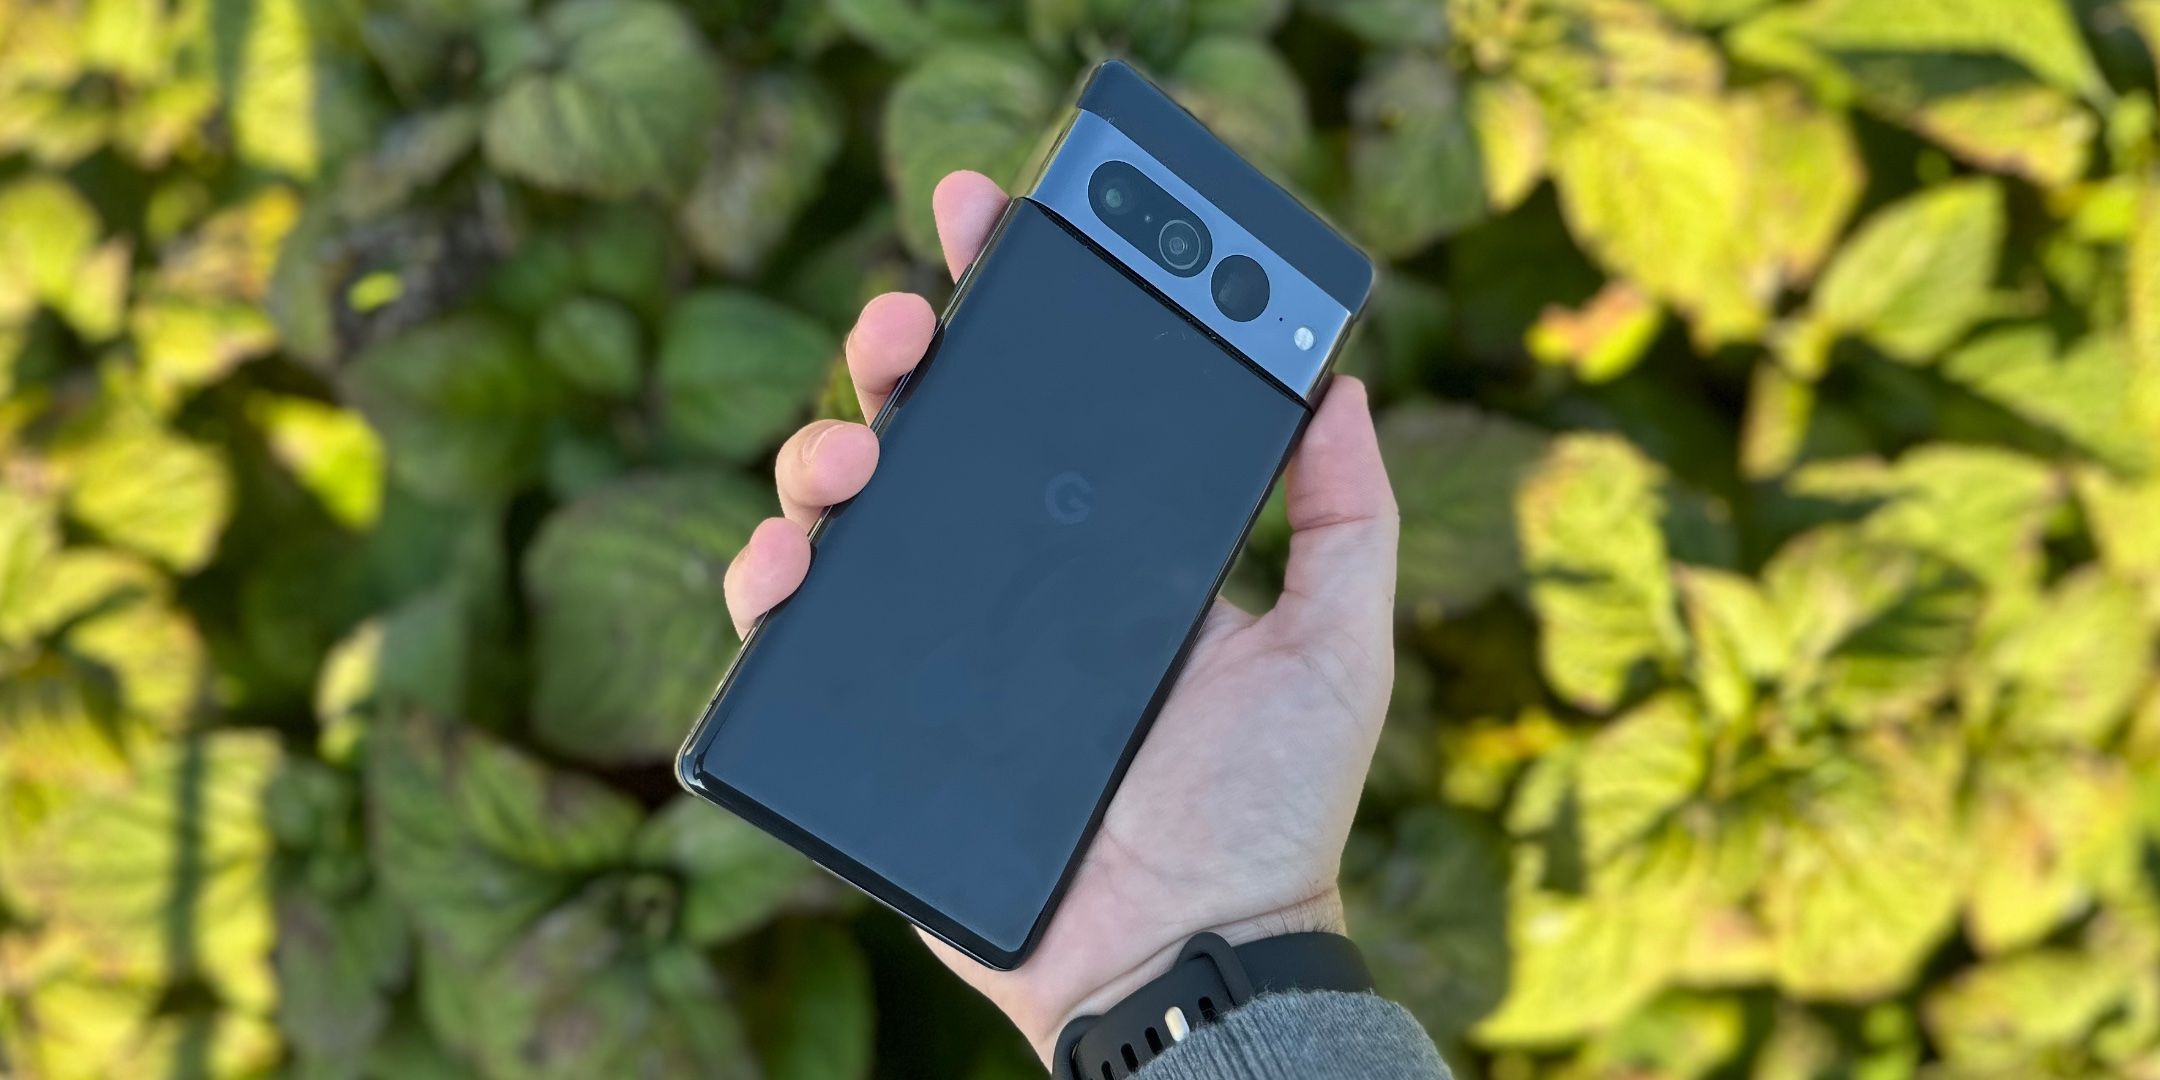 Photo of the Pixel 7 Pro in hand showing the back of the phone